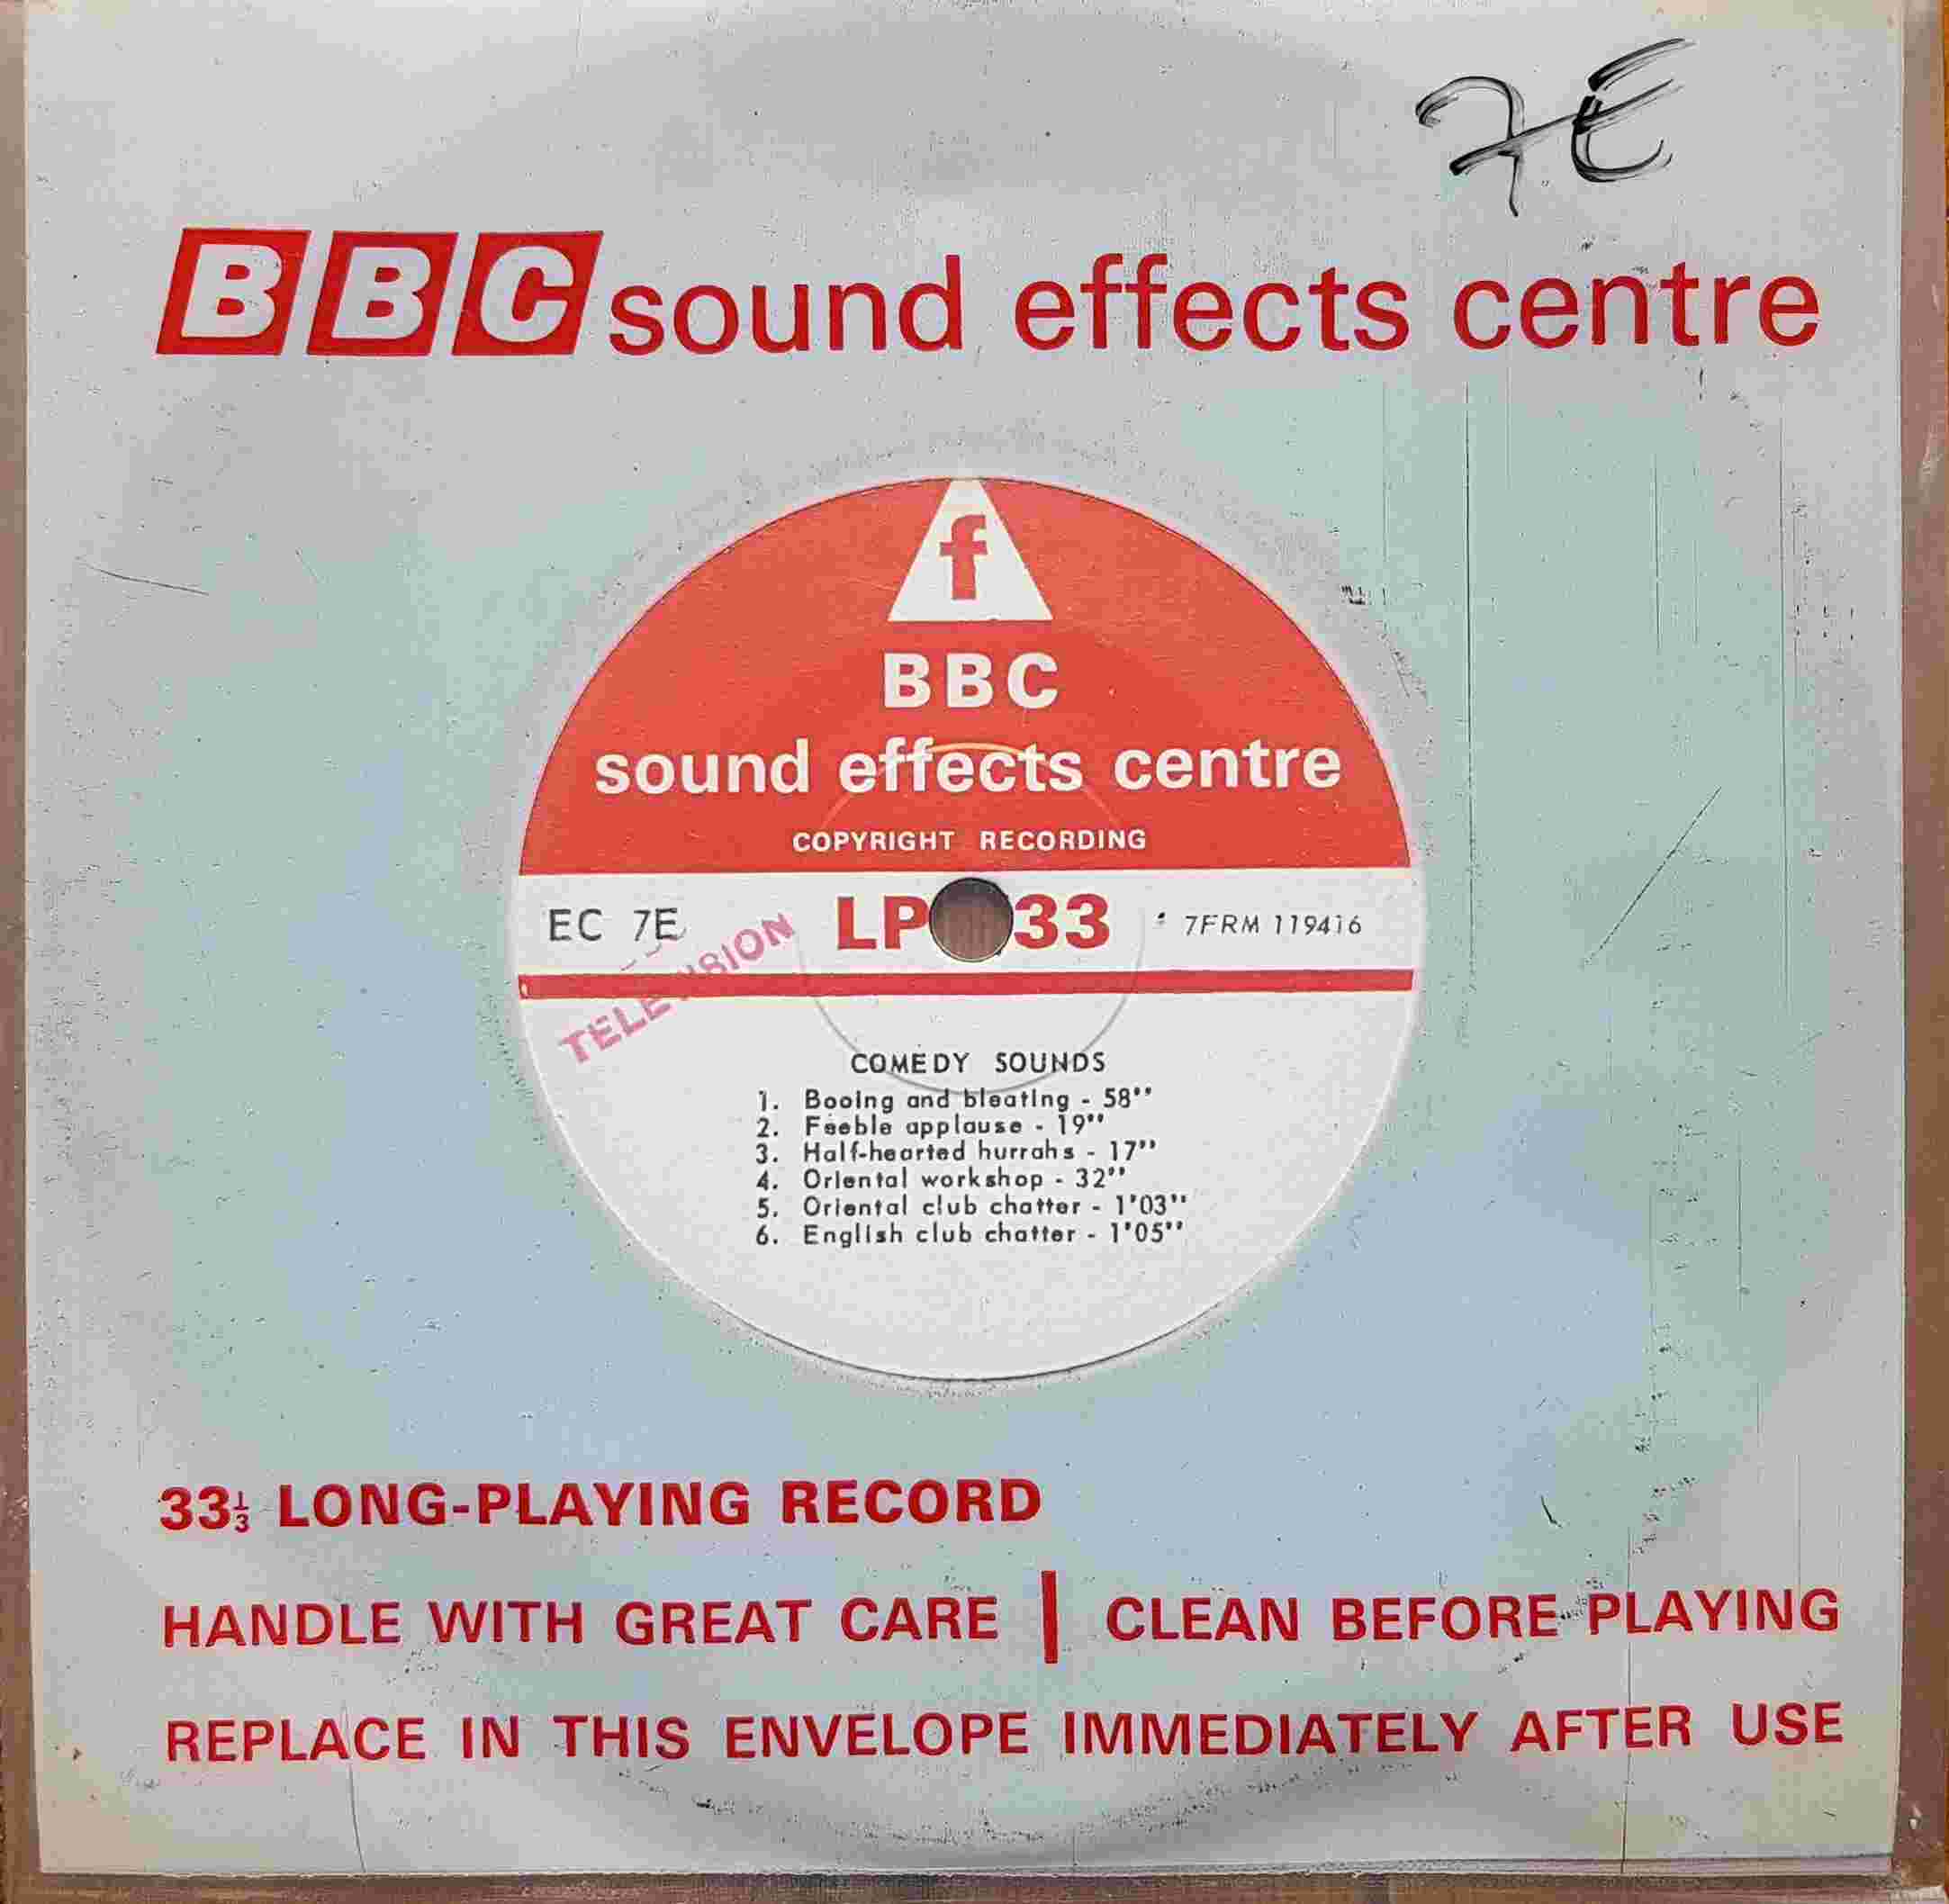 Picture of EC 7E Comedy sounds by artist Not registered from the BBC singles - Records and Tapes library